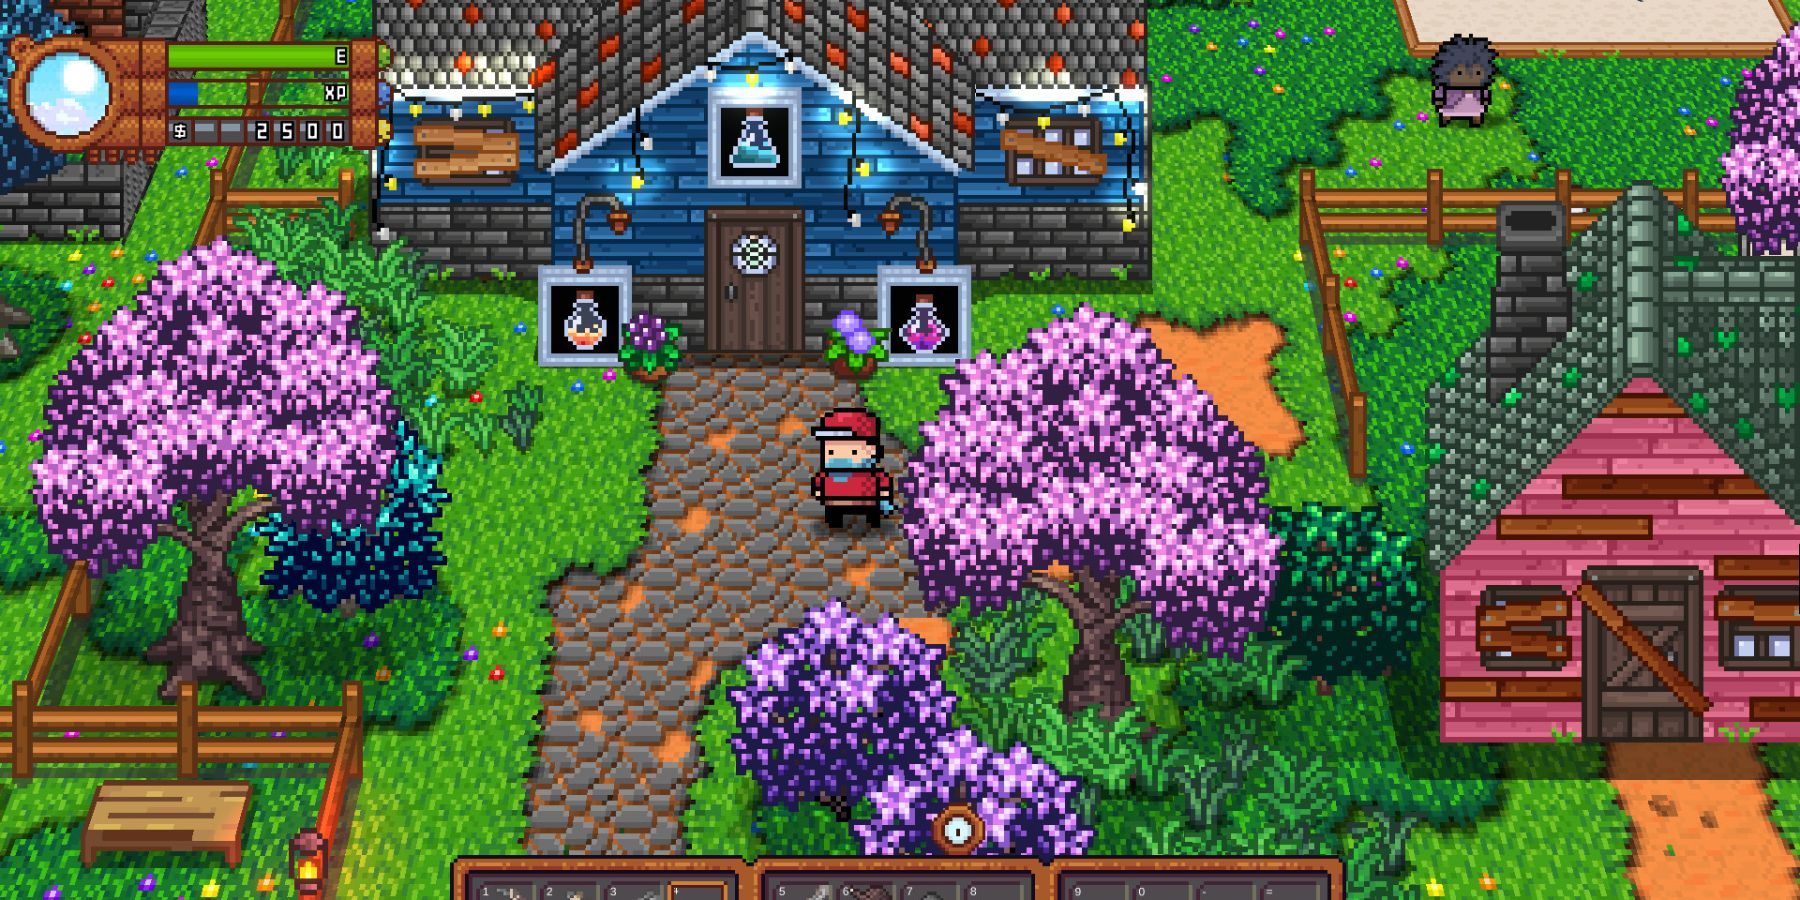 The player seen traveling around town in Monster Harvest